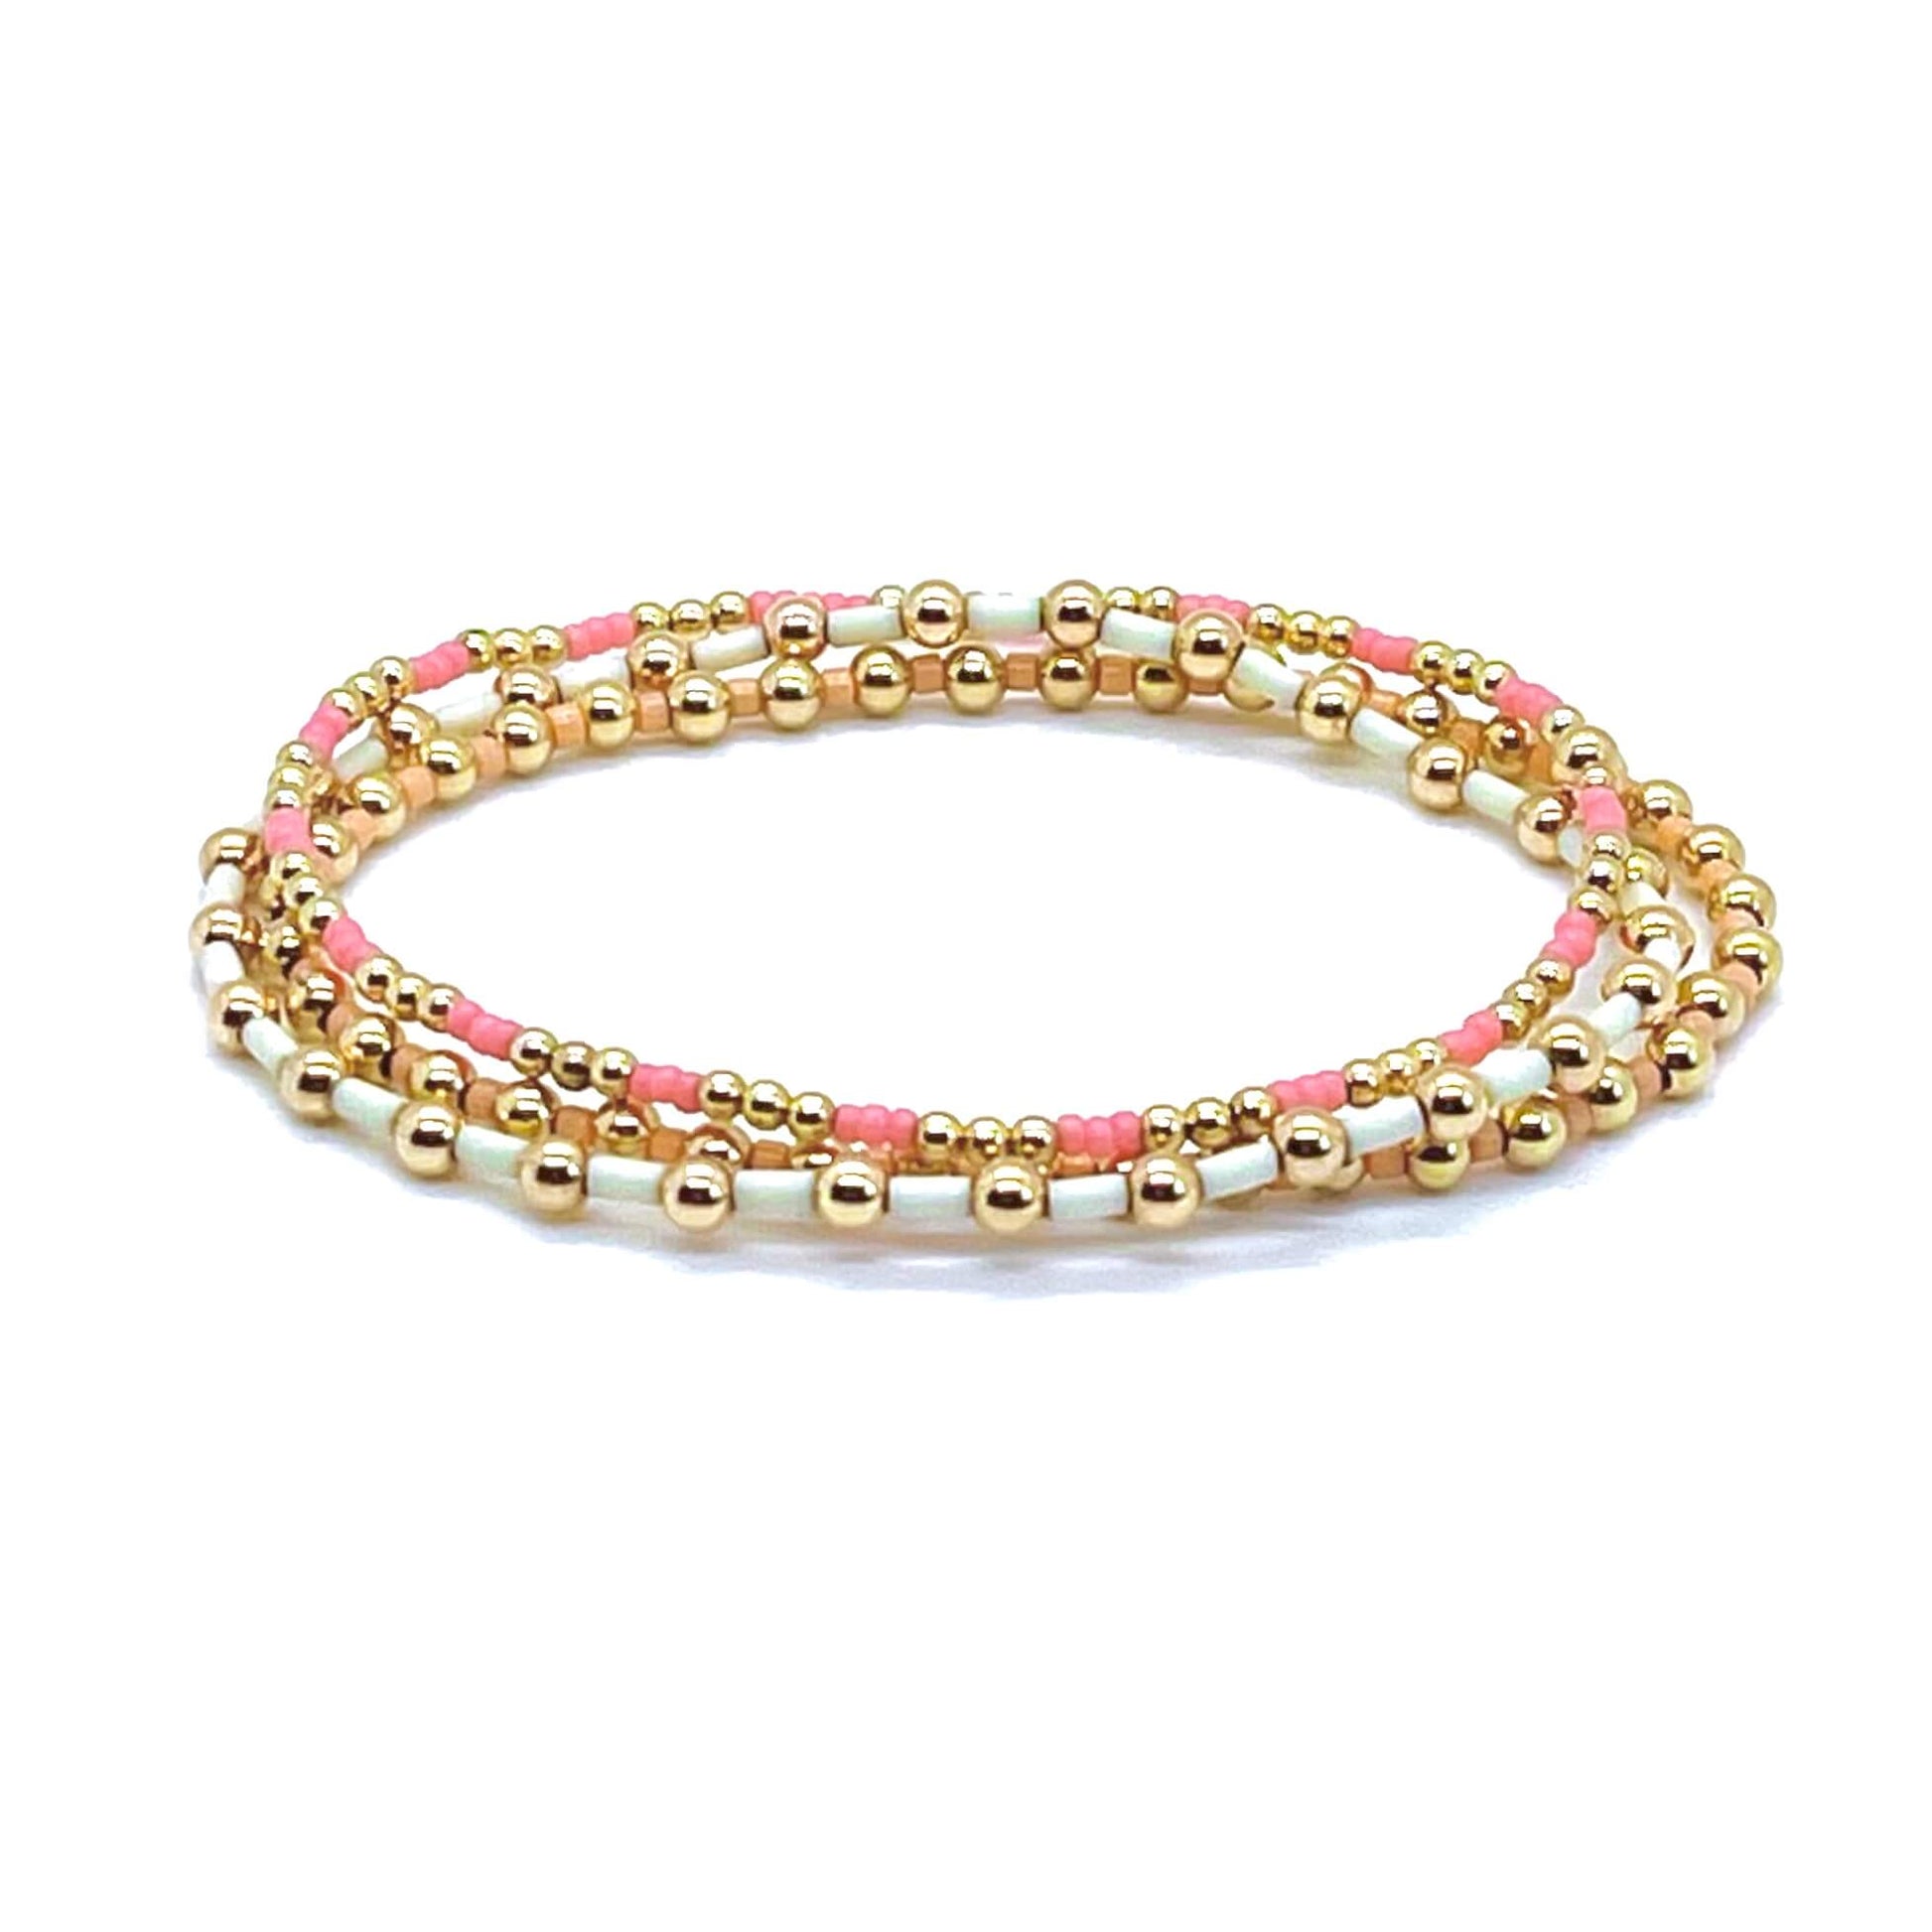 Women's beaded bracelets with gold balls and pink, white, and peach glass seed beads on elastic stretch.